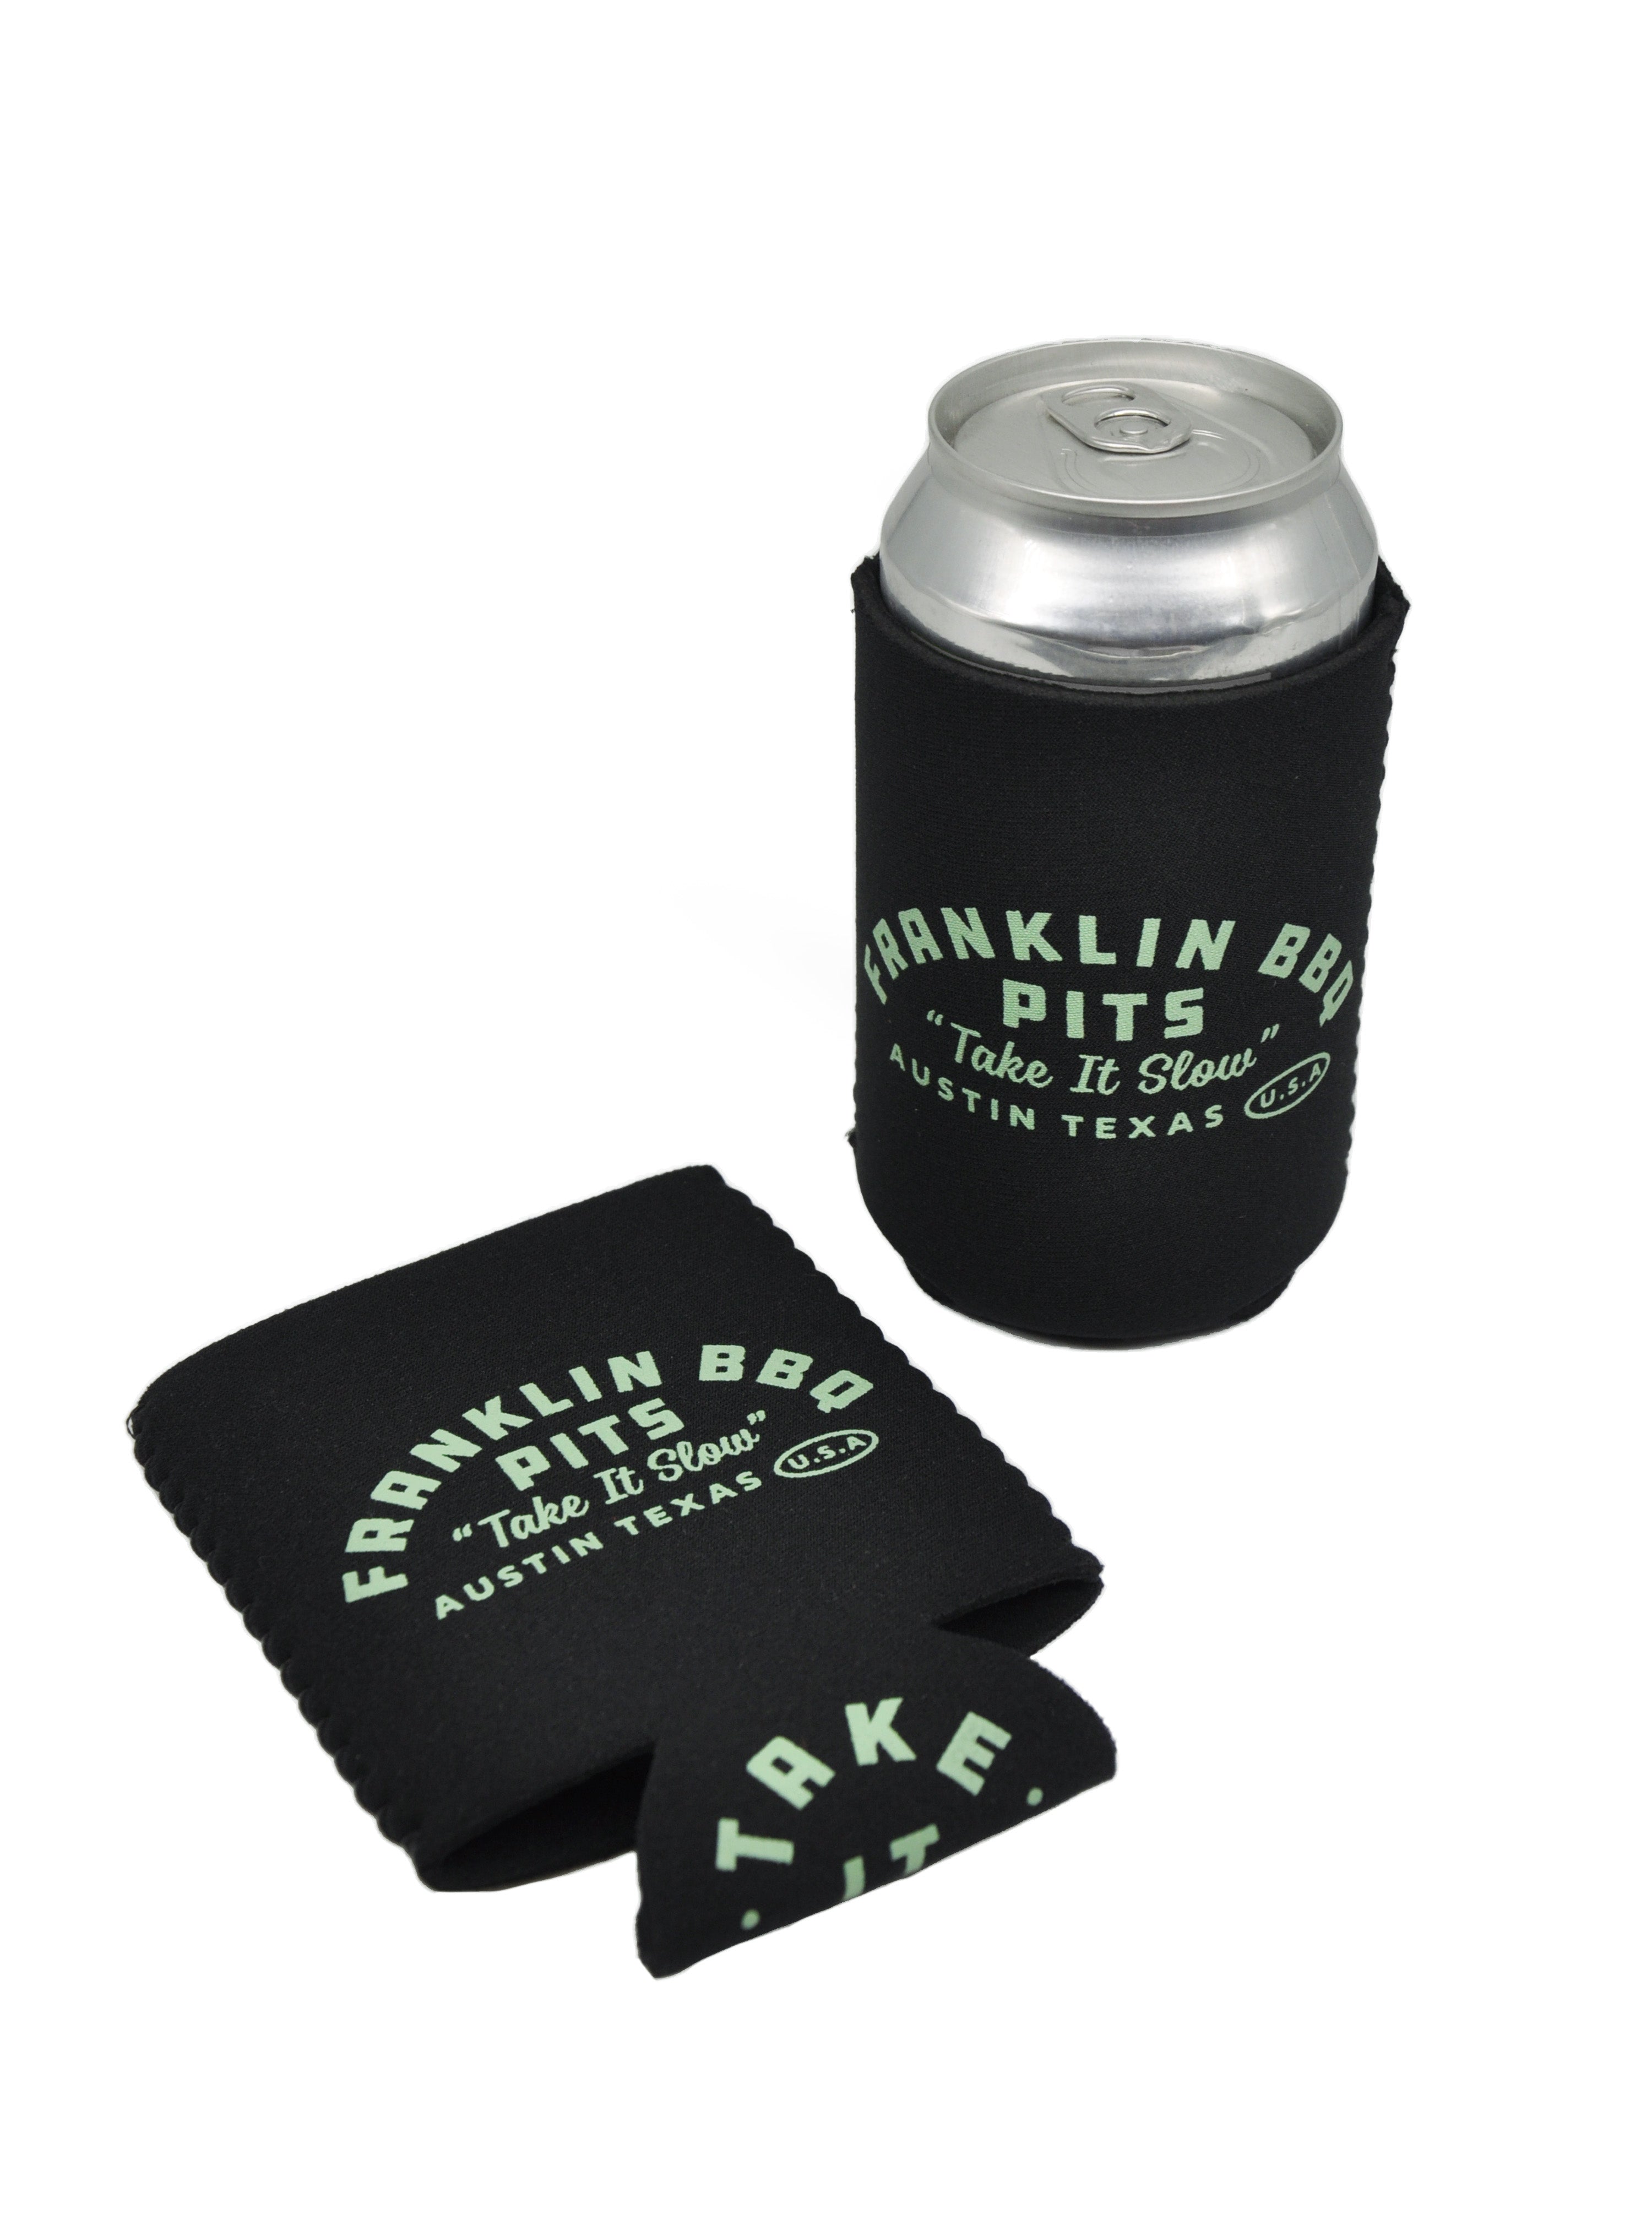 Black beer hugger that reads "Franklin BBQ Pits 'Take it Slow' with Austin, Texas below. Underside of beer hugger reads TAKE IT SLOW